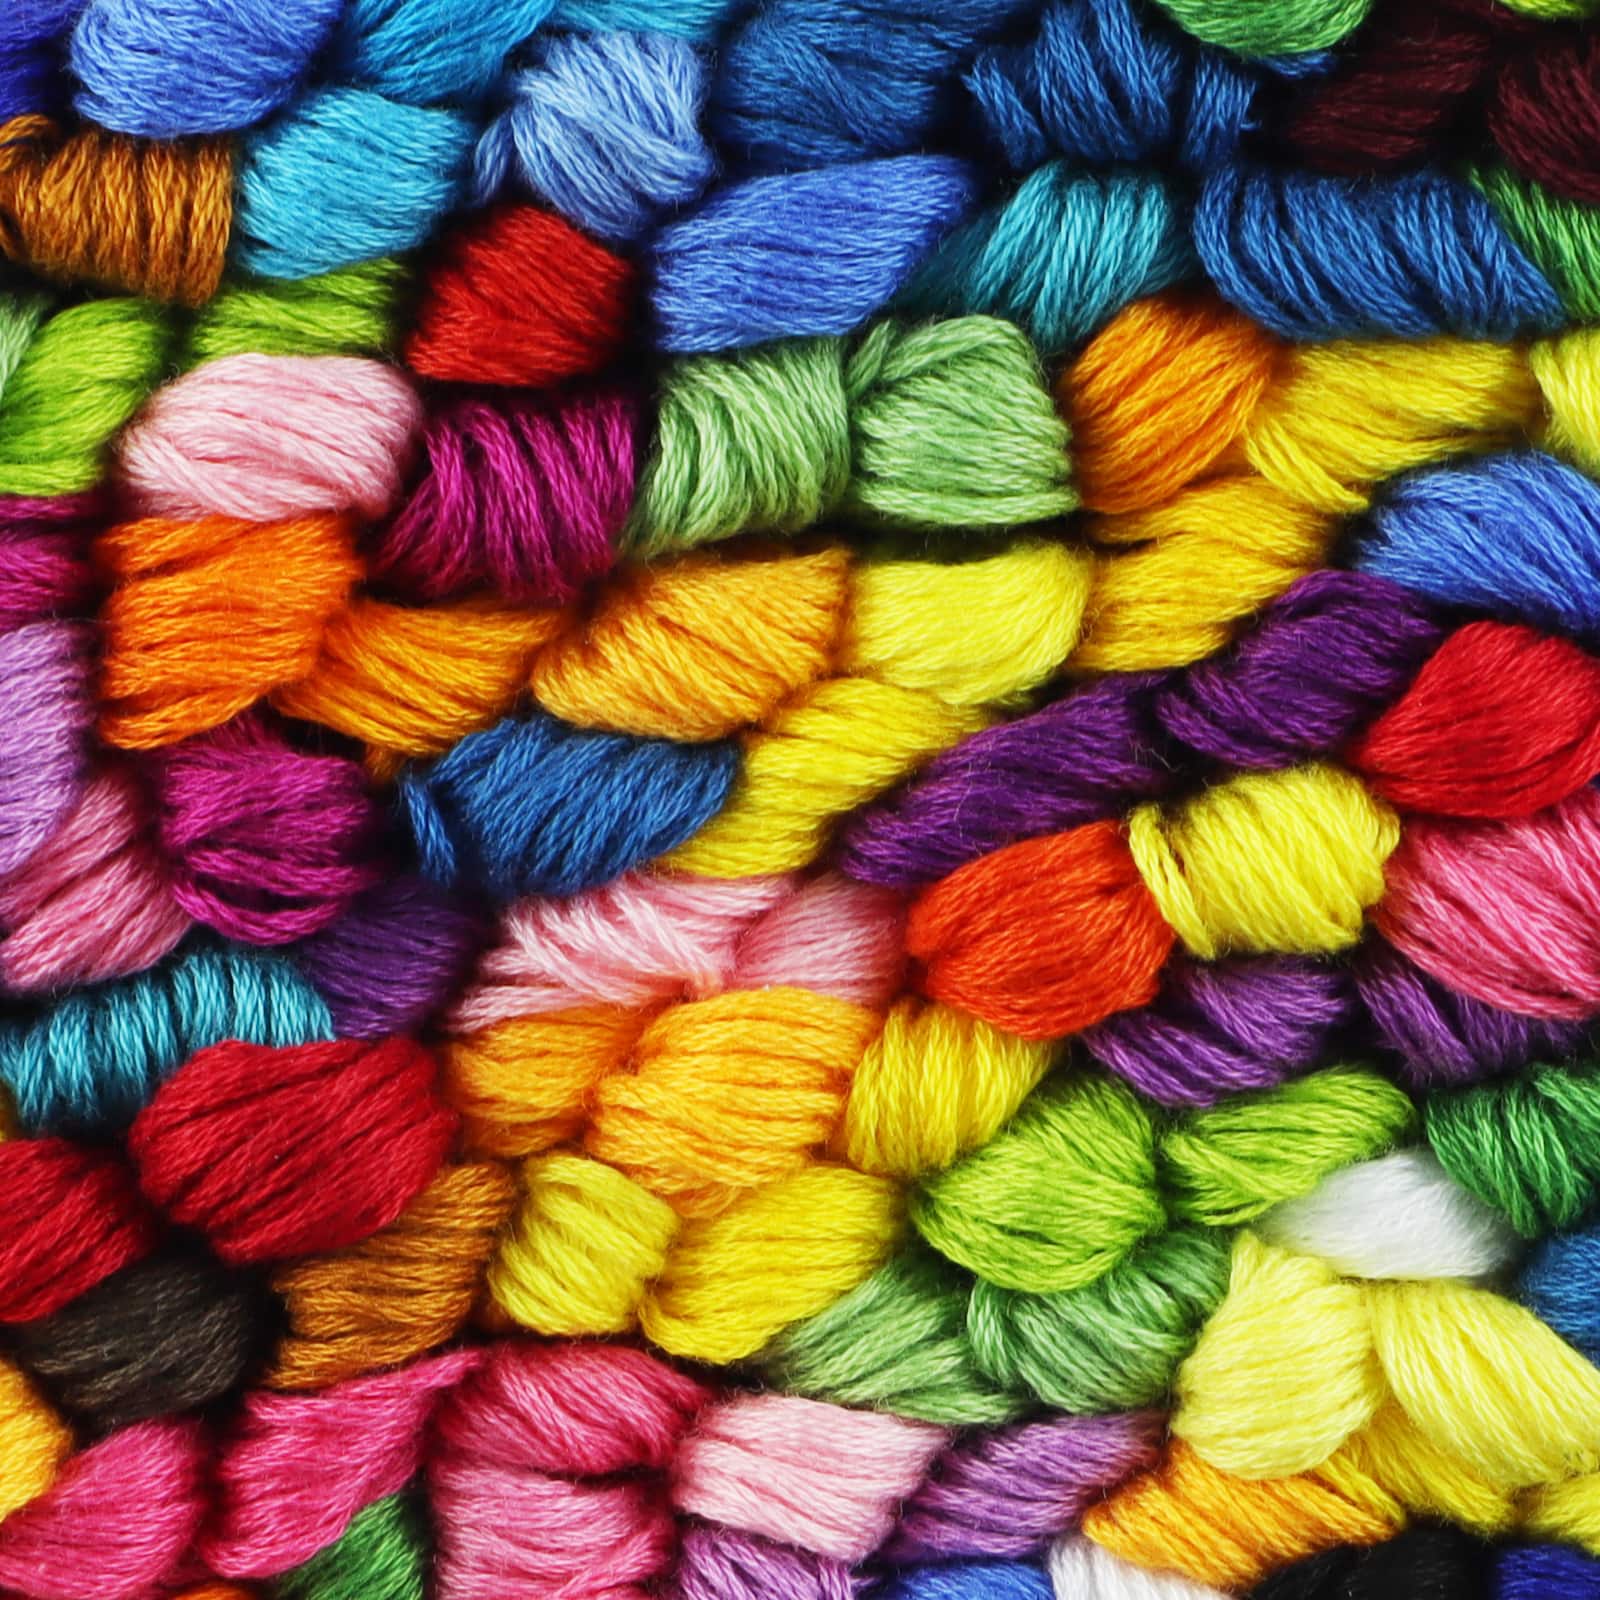 Rainbow Color Embroidery Floss, 250 Skeins Cross Stitch Threads Cotton  Friendship Bracelets String 8.75yd/per with 6 Strands for Cross Stitch  Handmade